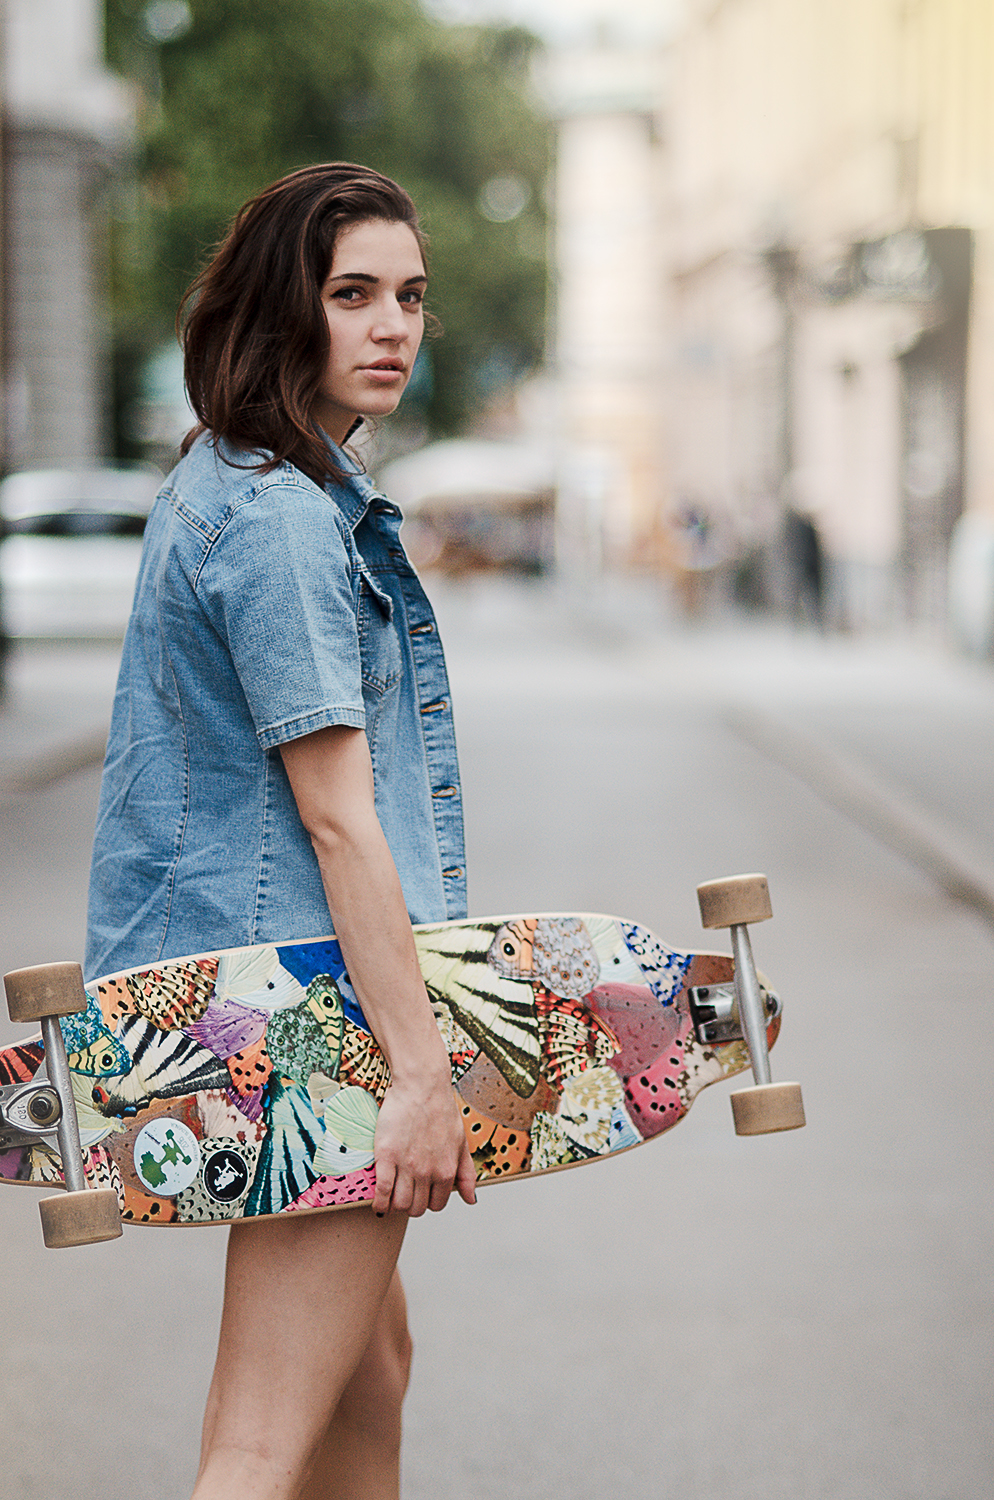 model Hipster LONGBOARD outfit commercial